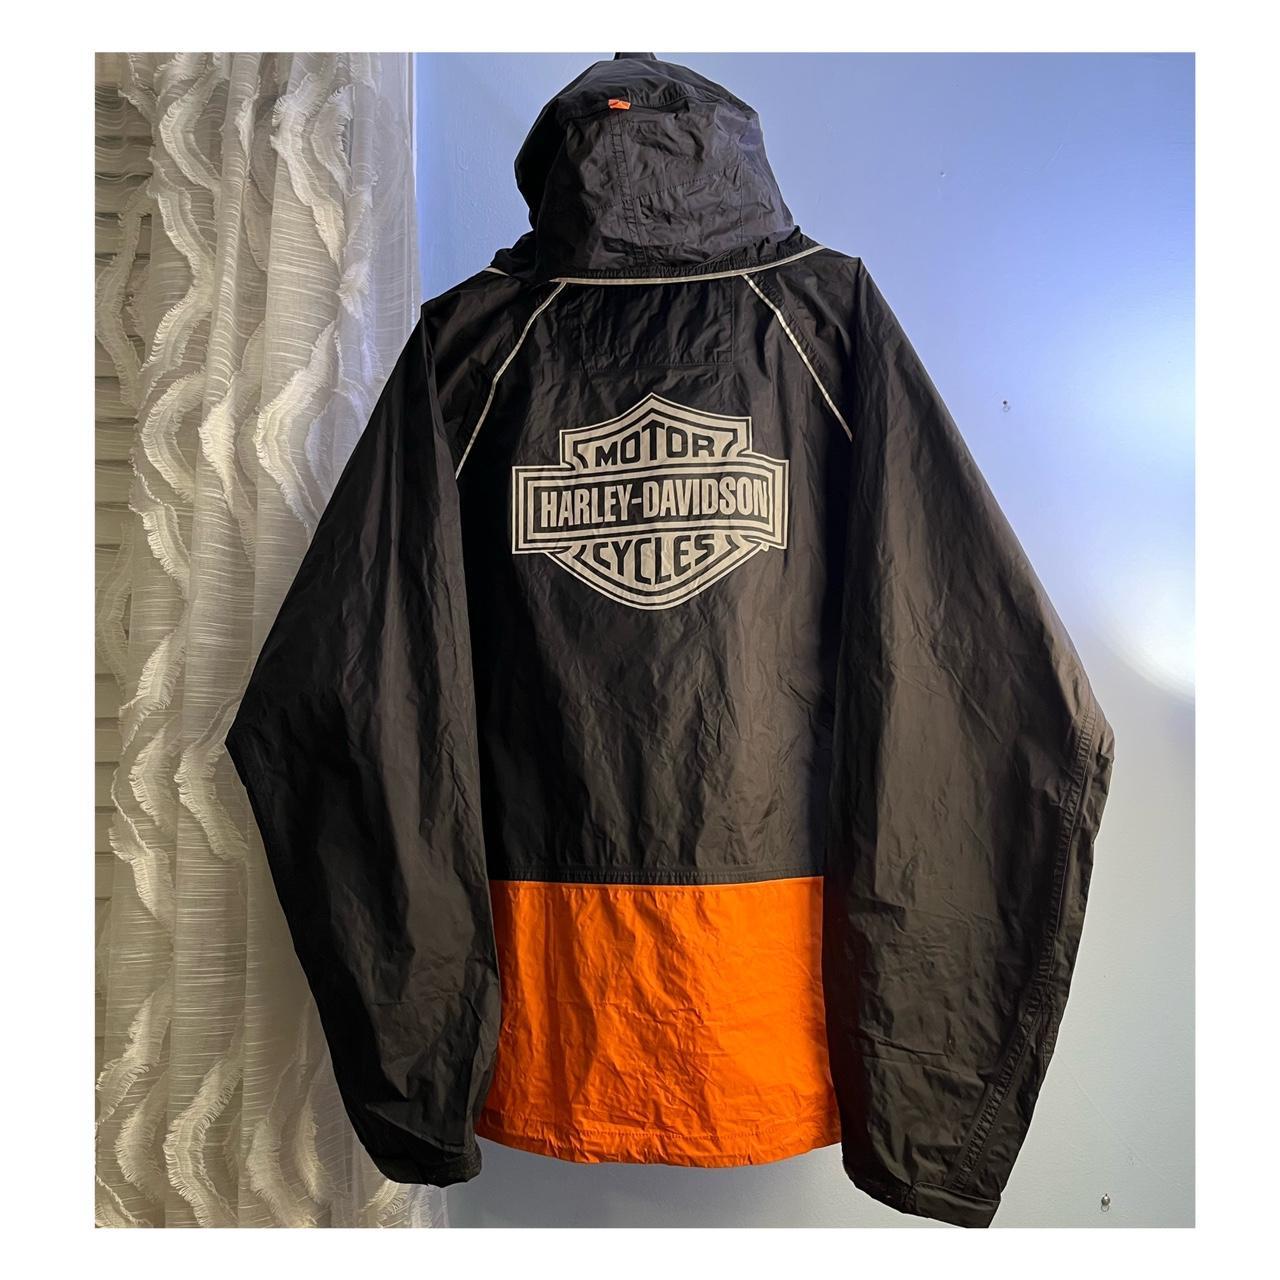 All in Motion water-resistant jacket It's a great - Depop